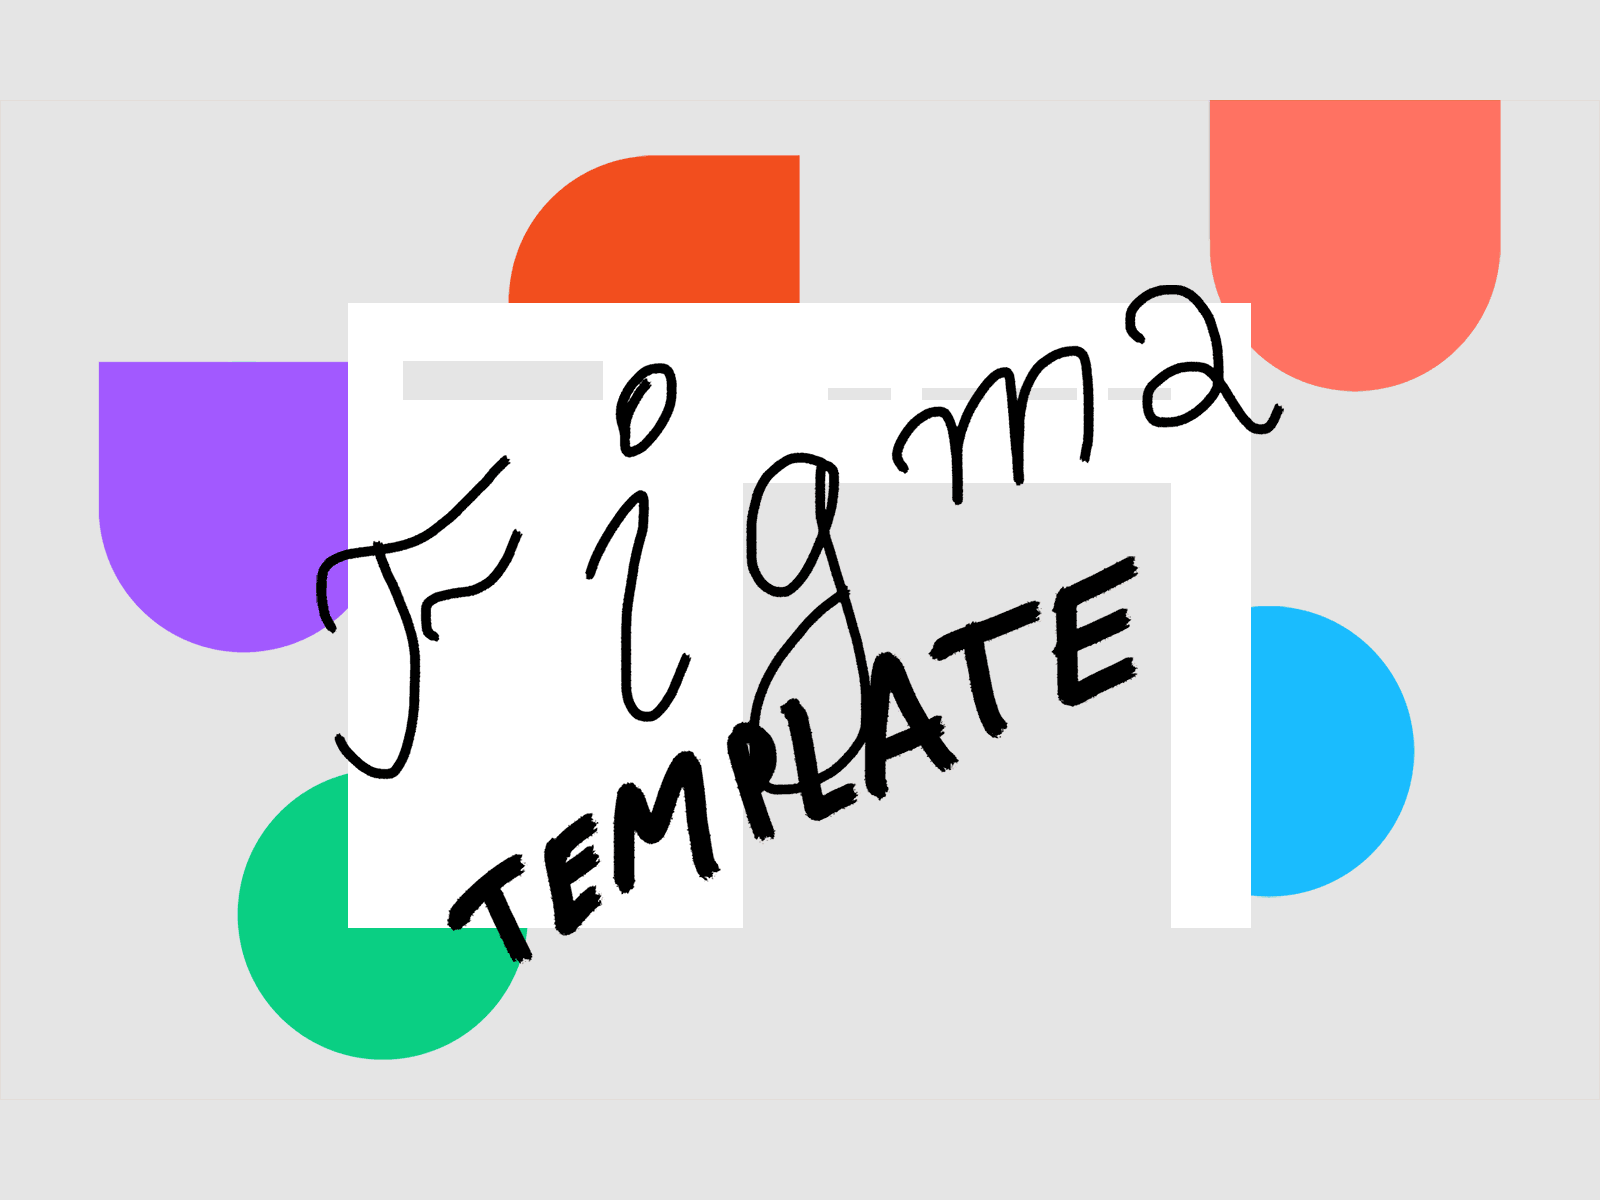 A free, real blog UI design template for Figma